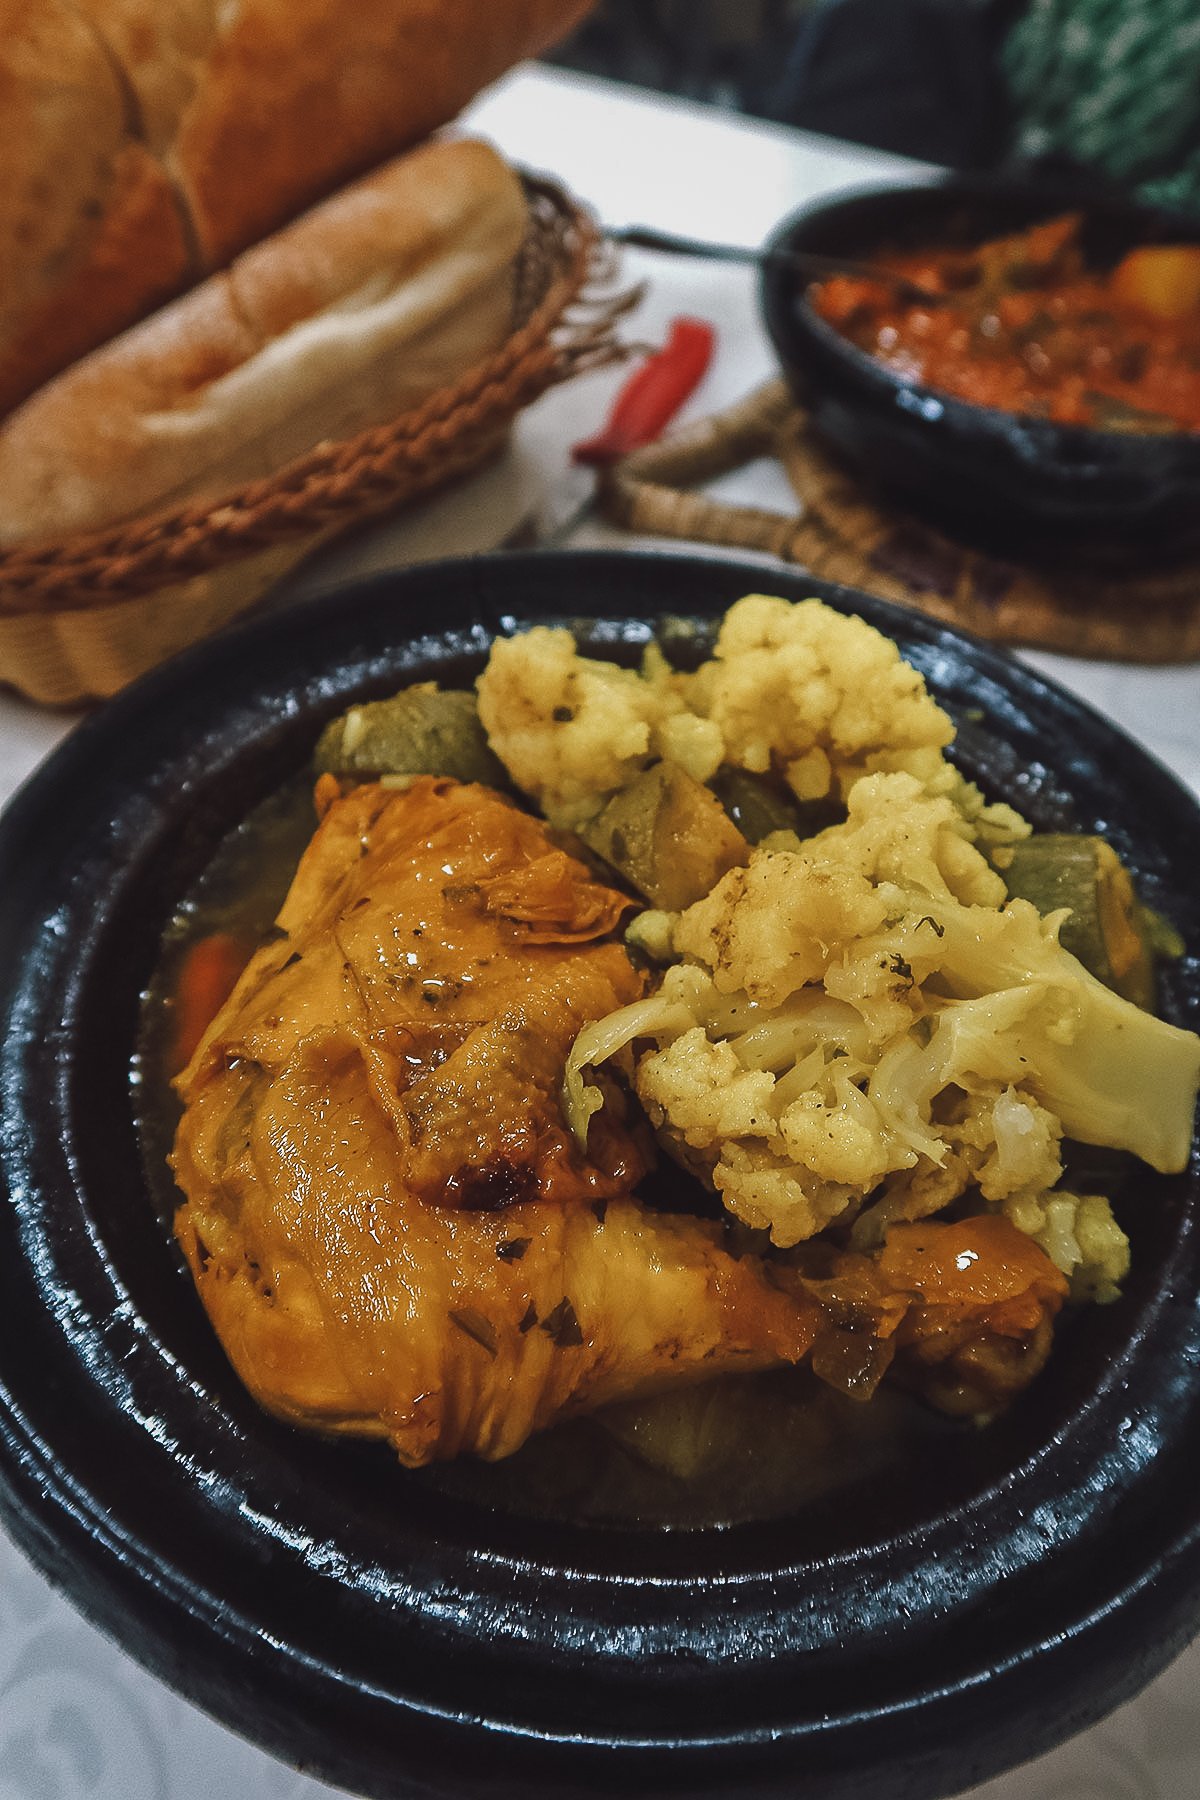 Chicken tagine at a restaurant in Tangier